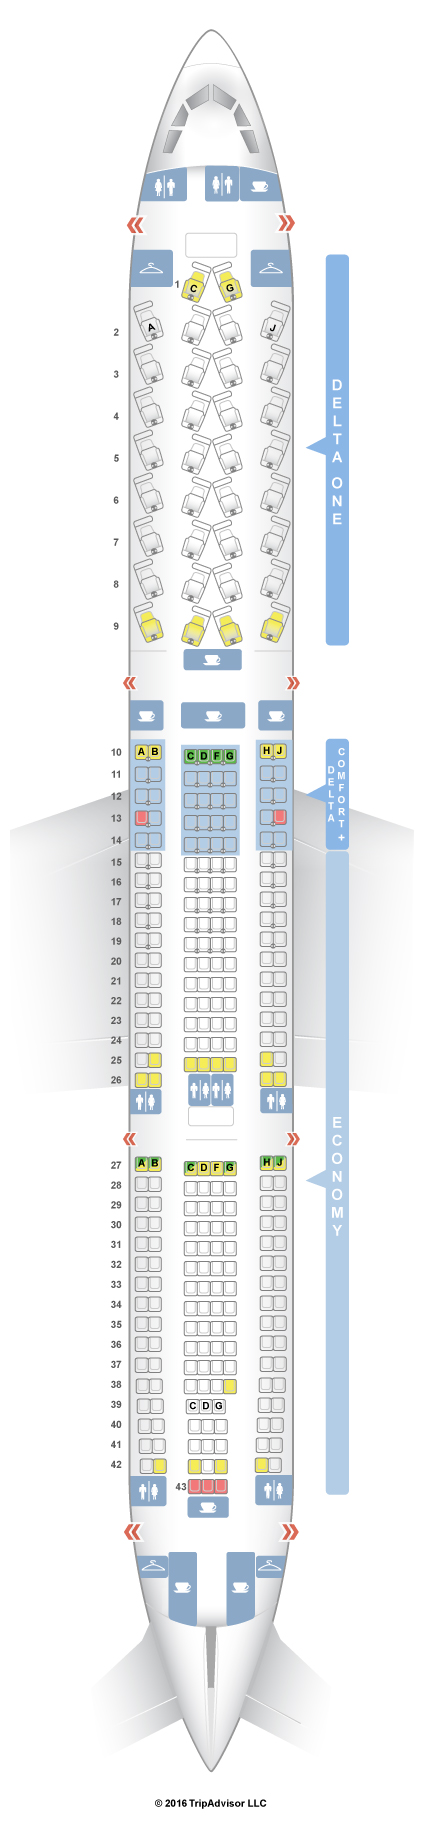 Delta Airbus A333 Seating Chart